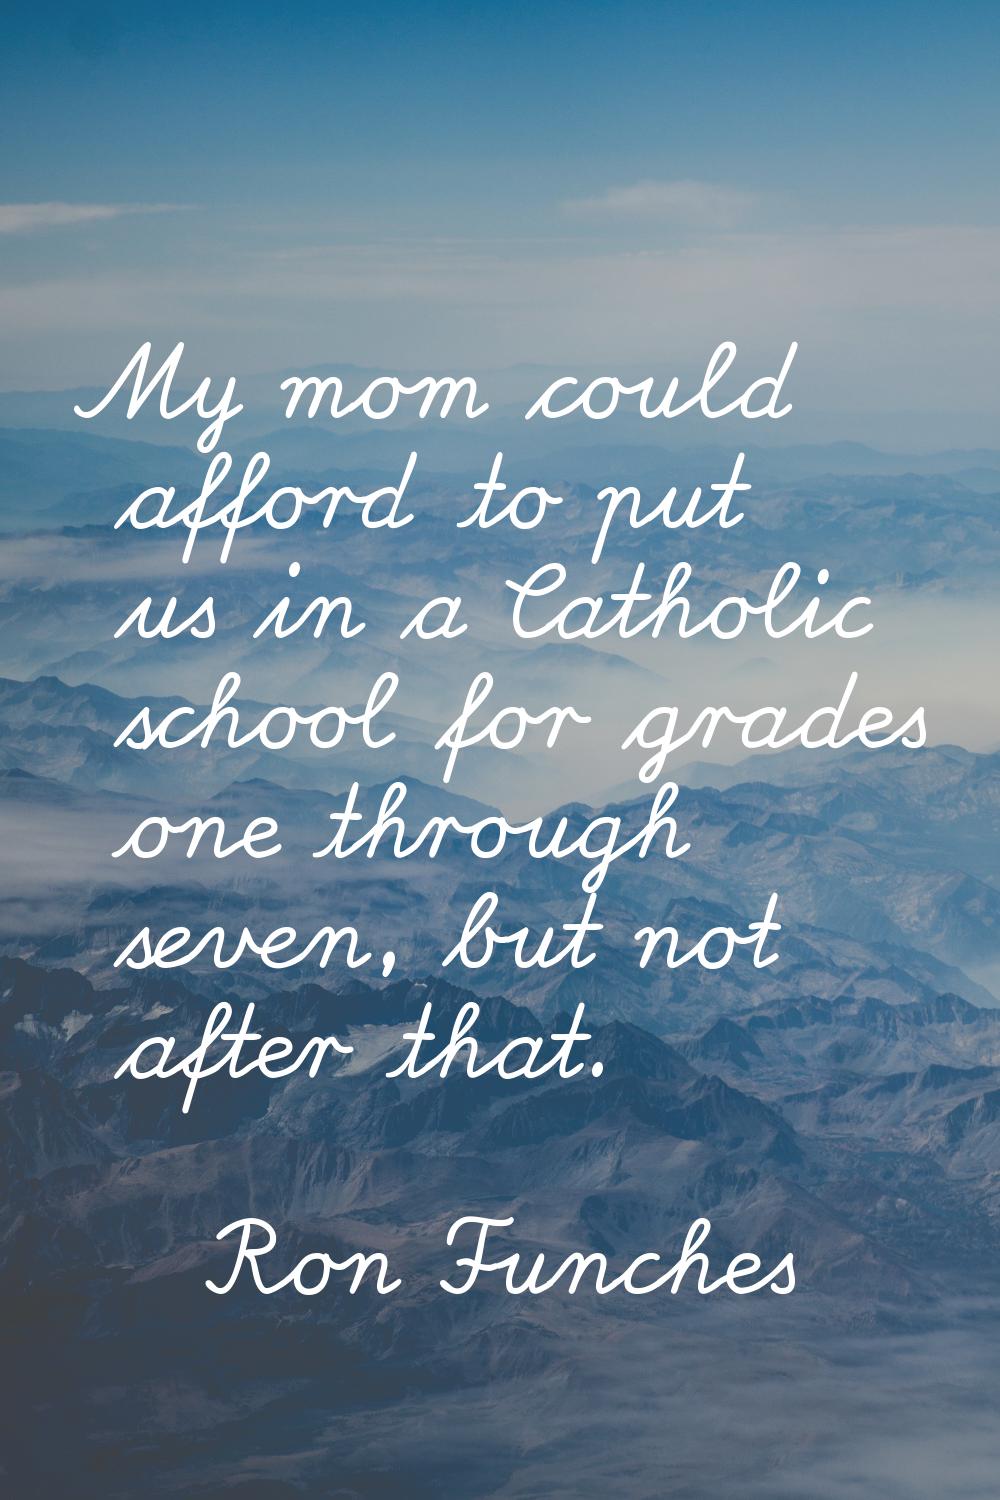 My mom could afford to put us in a Catholic school for grades one through seven, but not after that